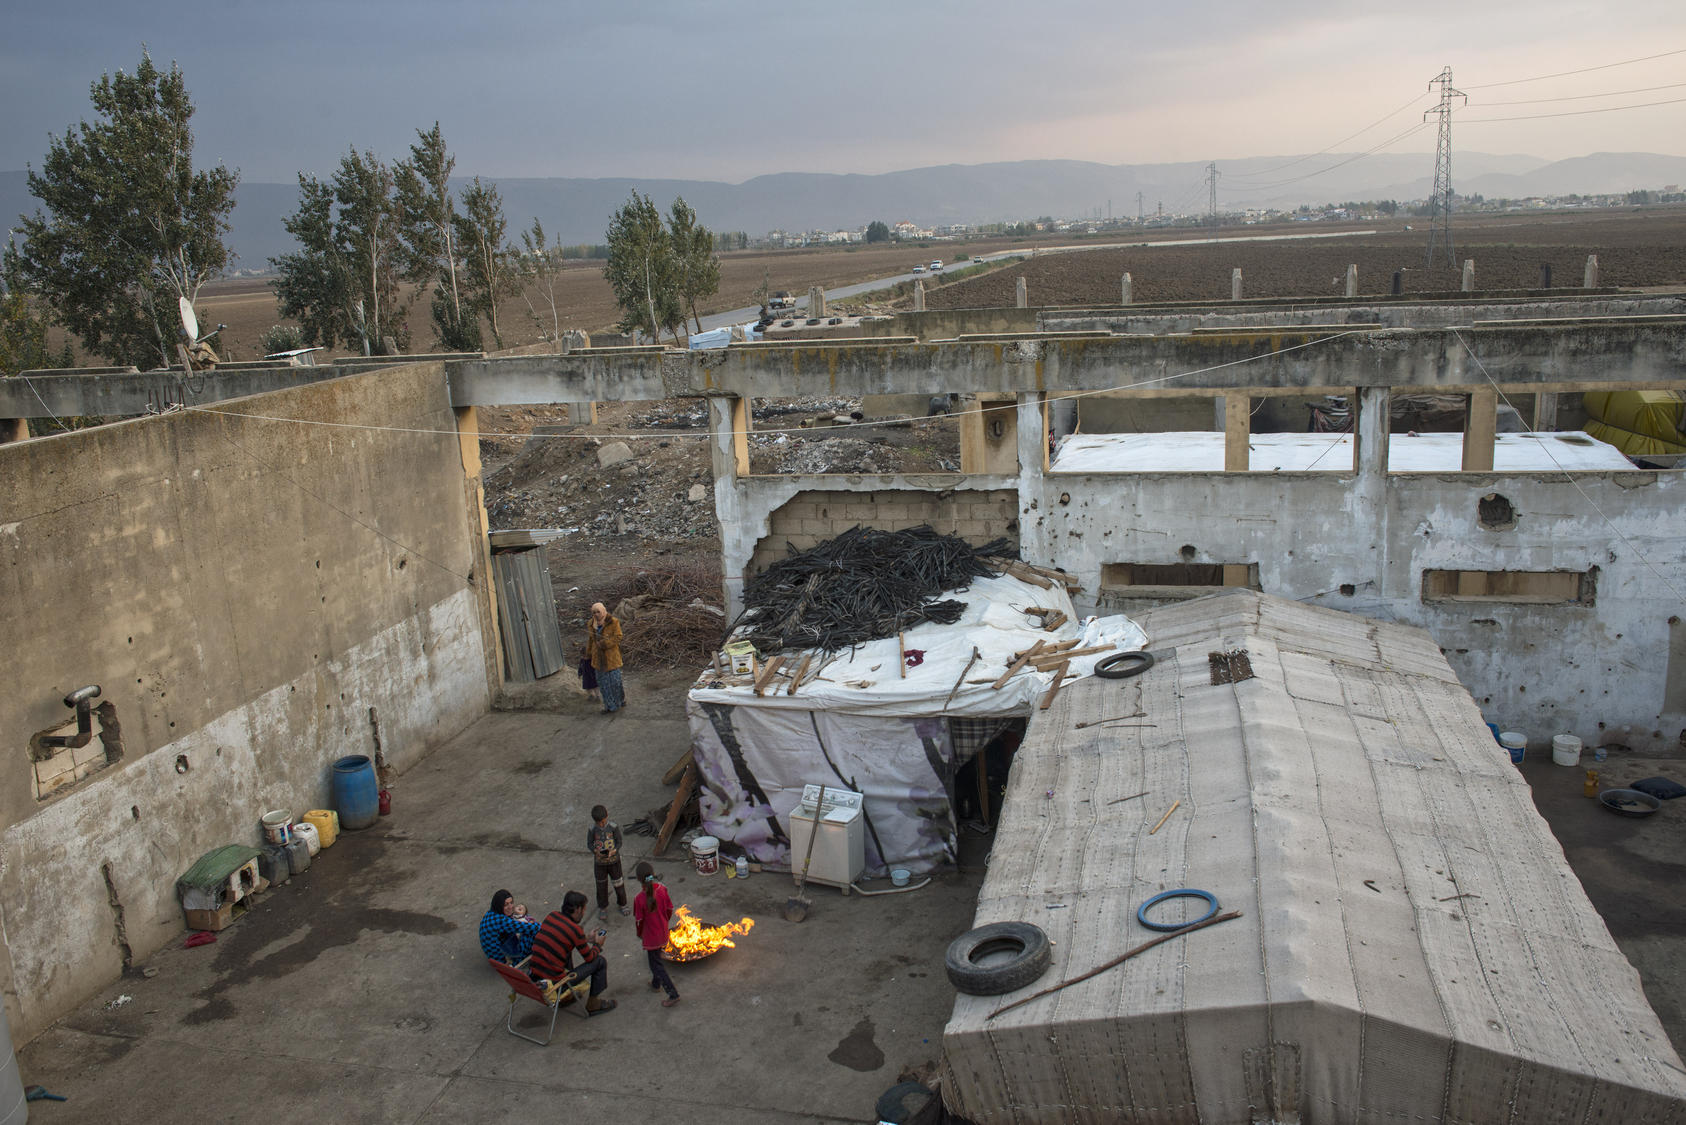 Syrian refugees live in a factory bombed by the Israeli military in 1982 near Faida, Lebanon. Photo Courtesy of The New York Times/ Lynsey Addario